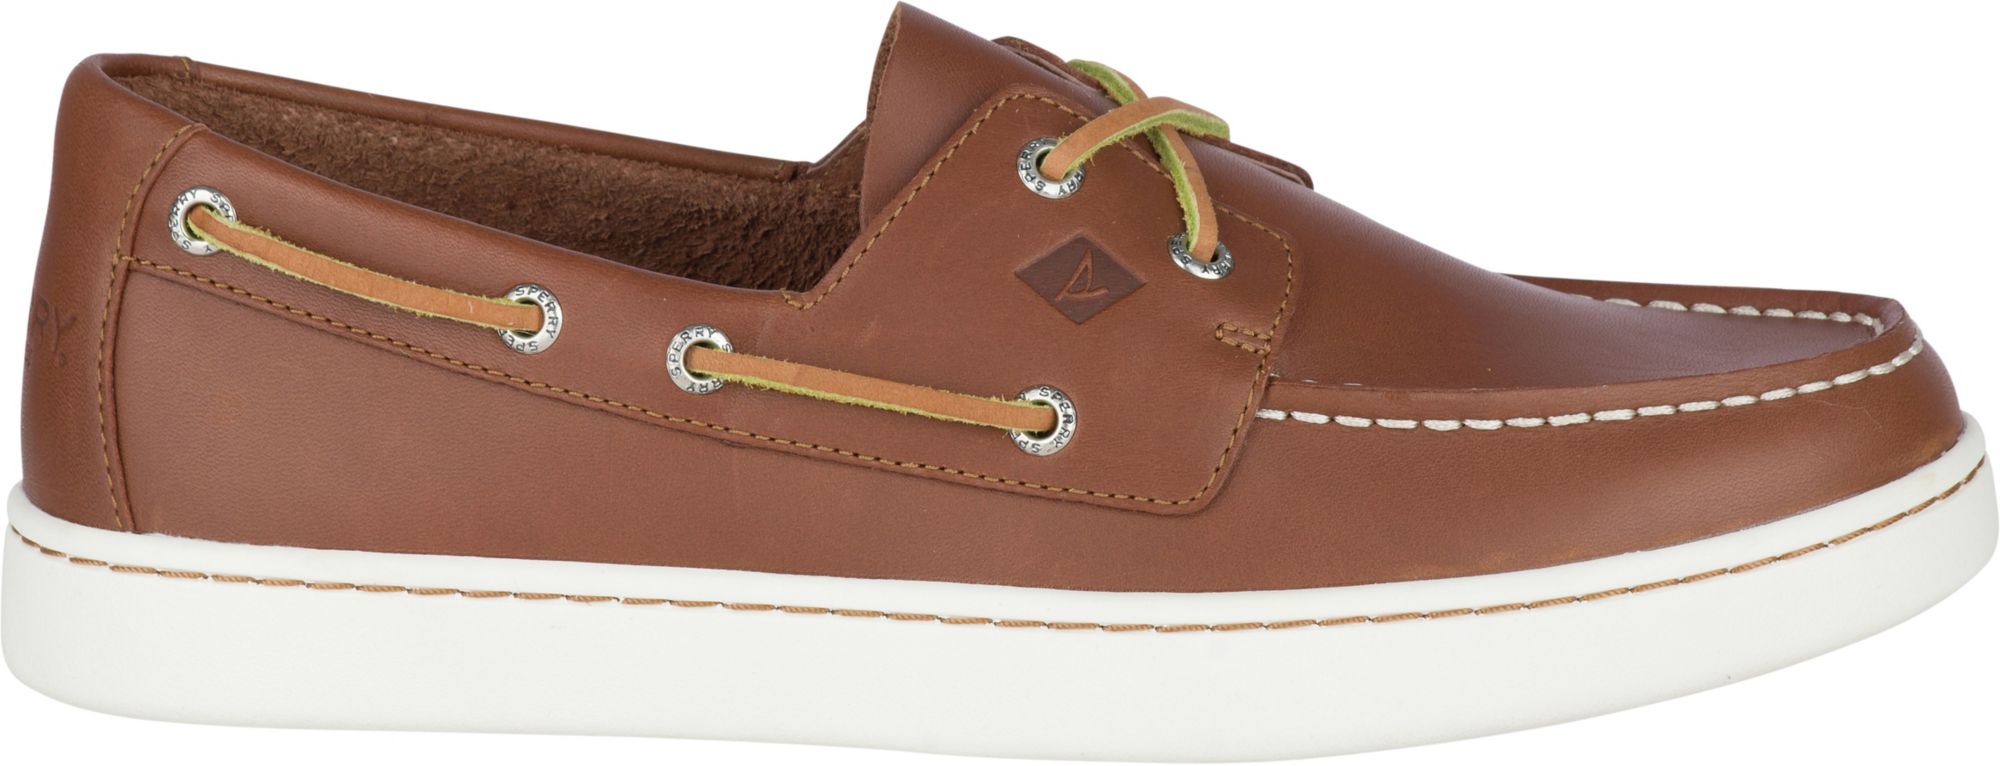 boat shoes brands